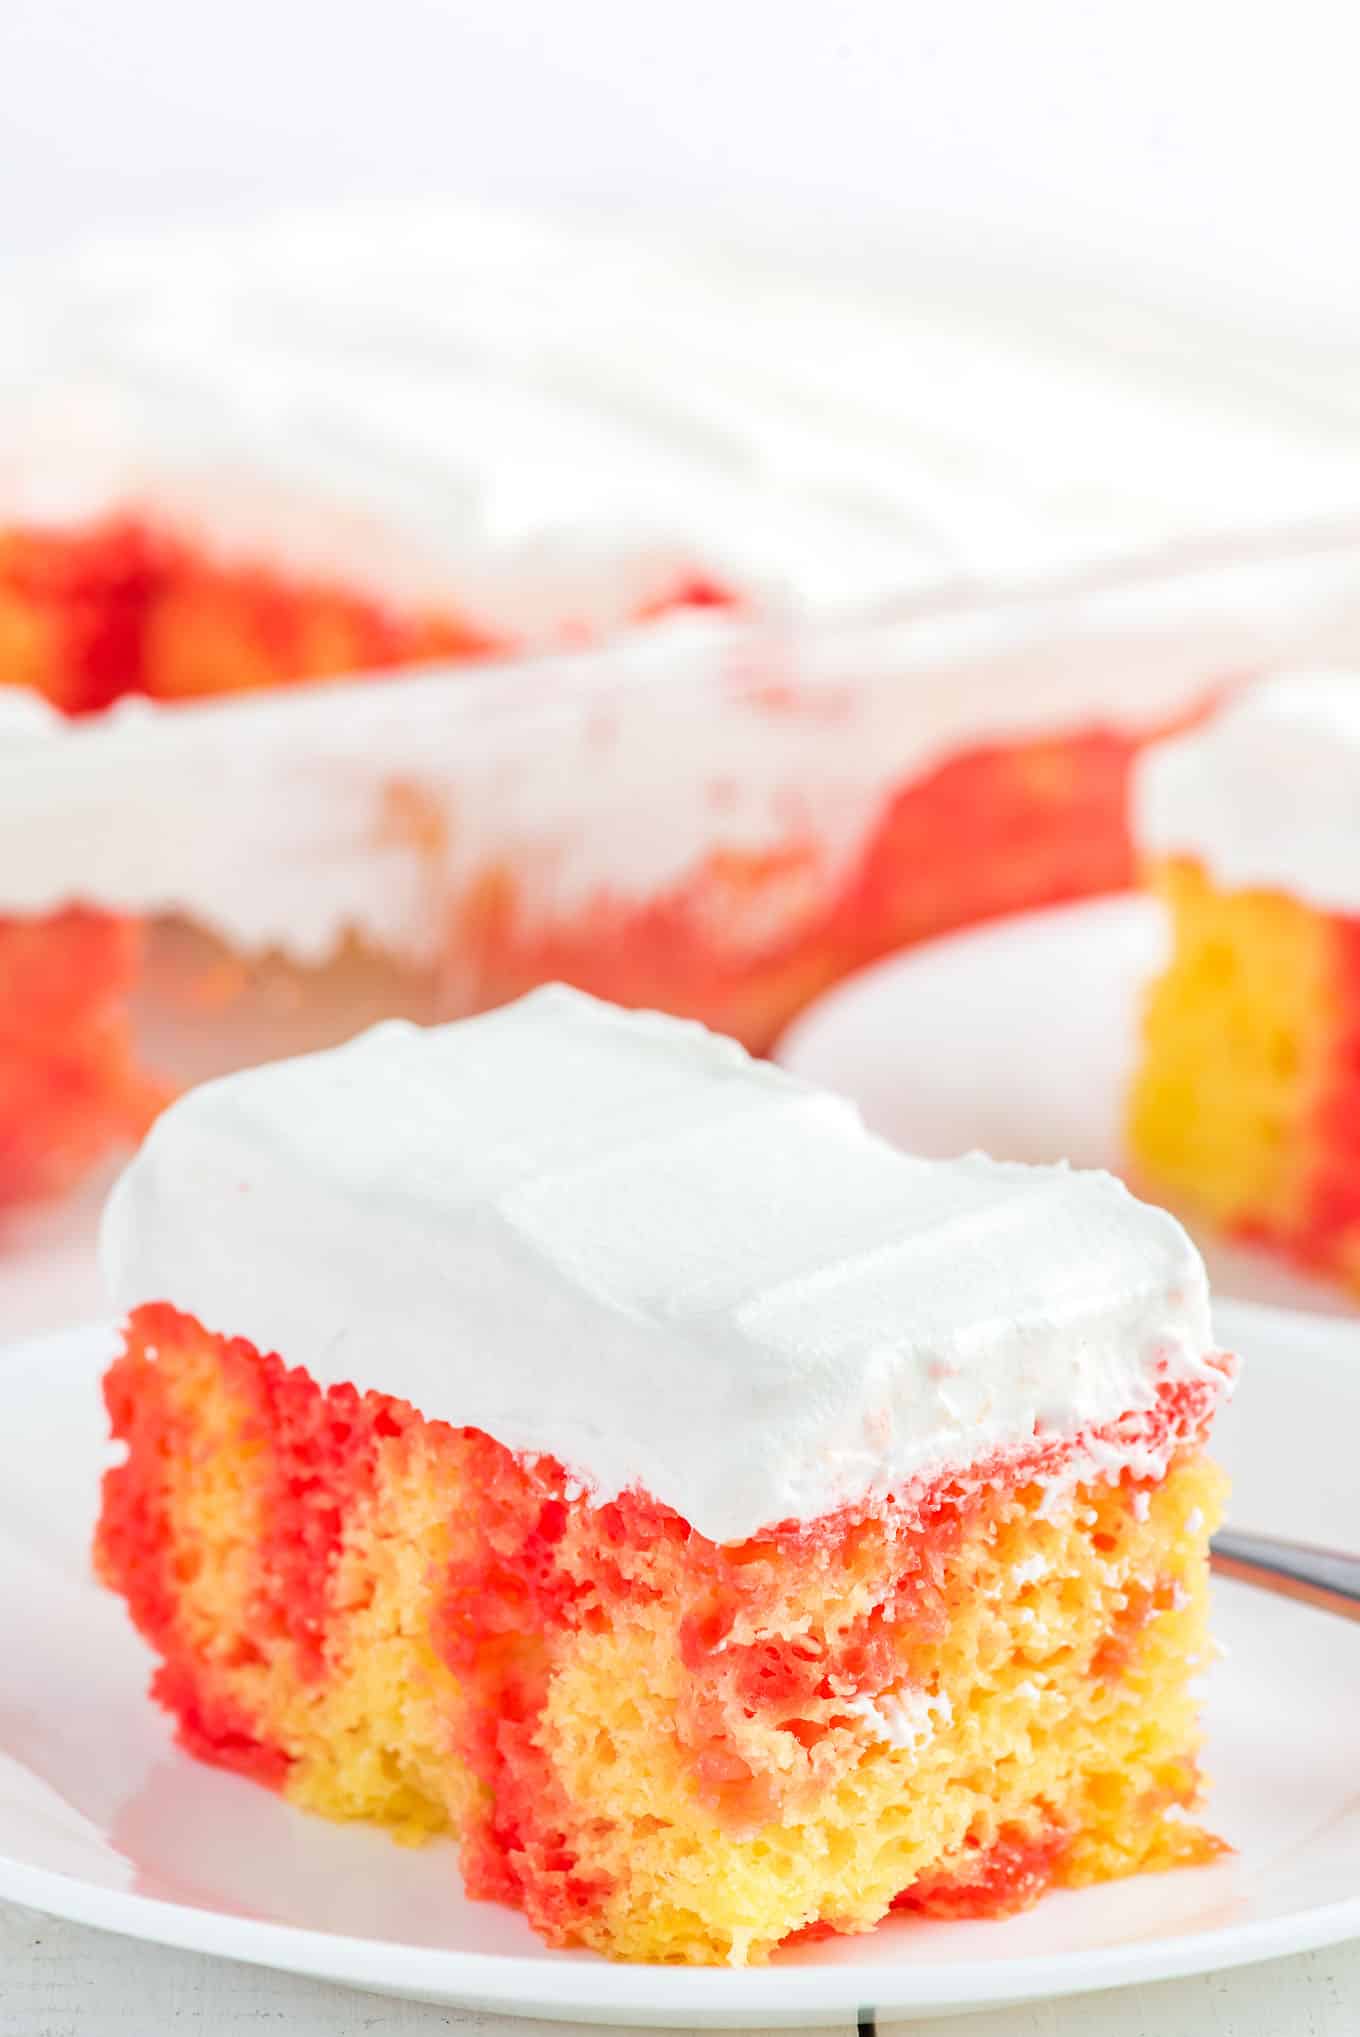 A square of strawberry and lemon cake on a plate topped with whipped cream frosting.